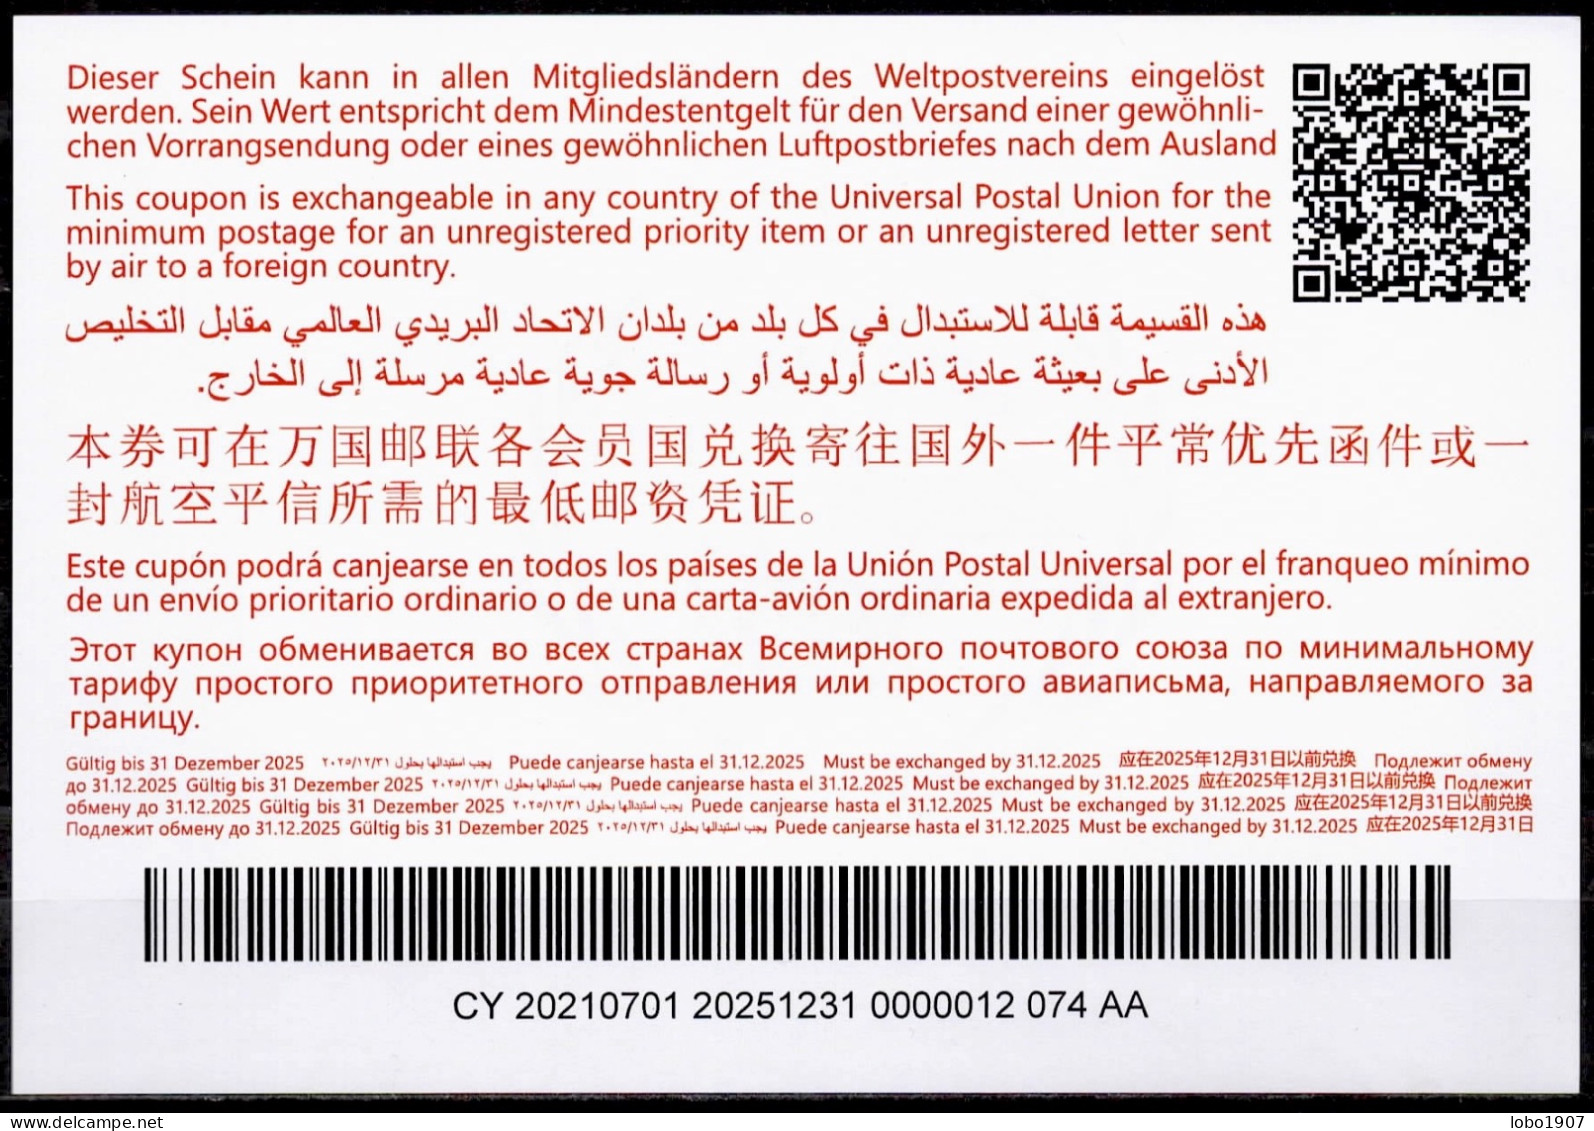 CHYPRE CYPRUS  Abidjan Type Ab47  20210701 AA  International Reply Coupon Reponse Antwortschein  IRC IAS  MINT ** - Covers & Documents